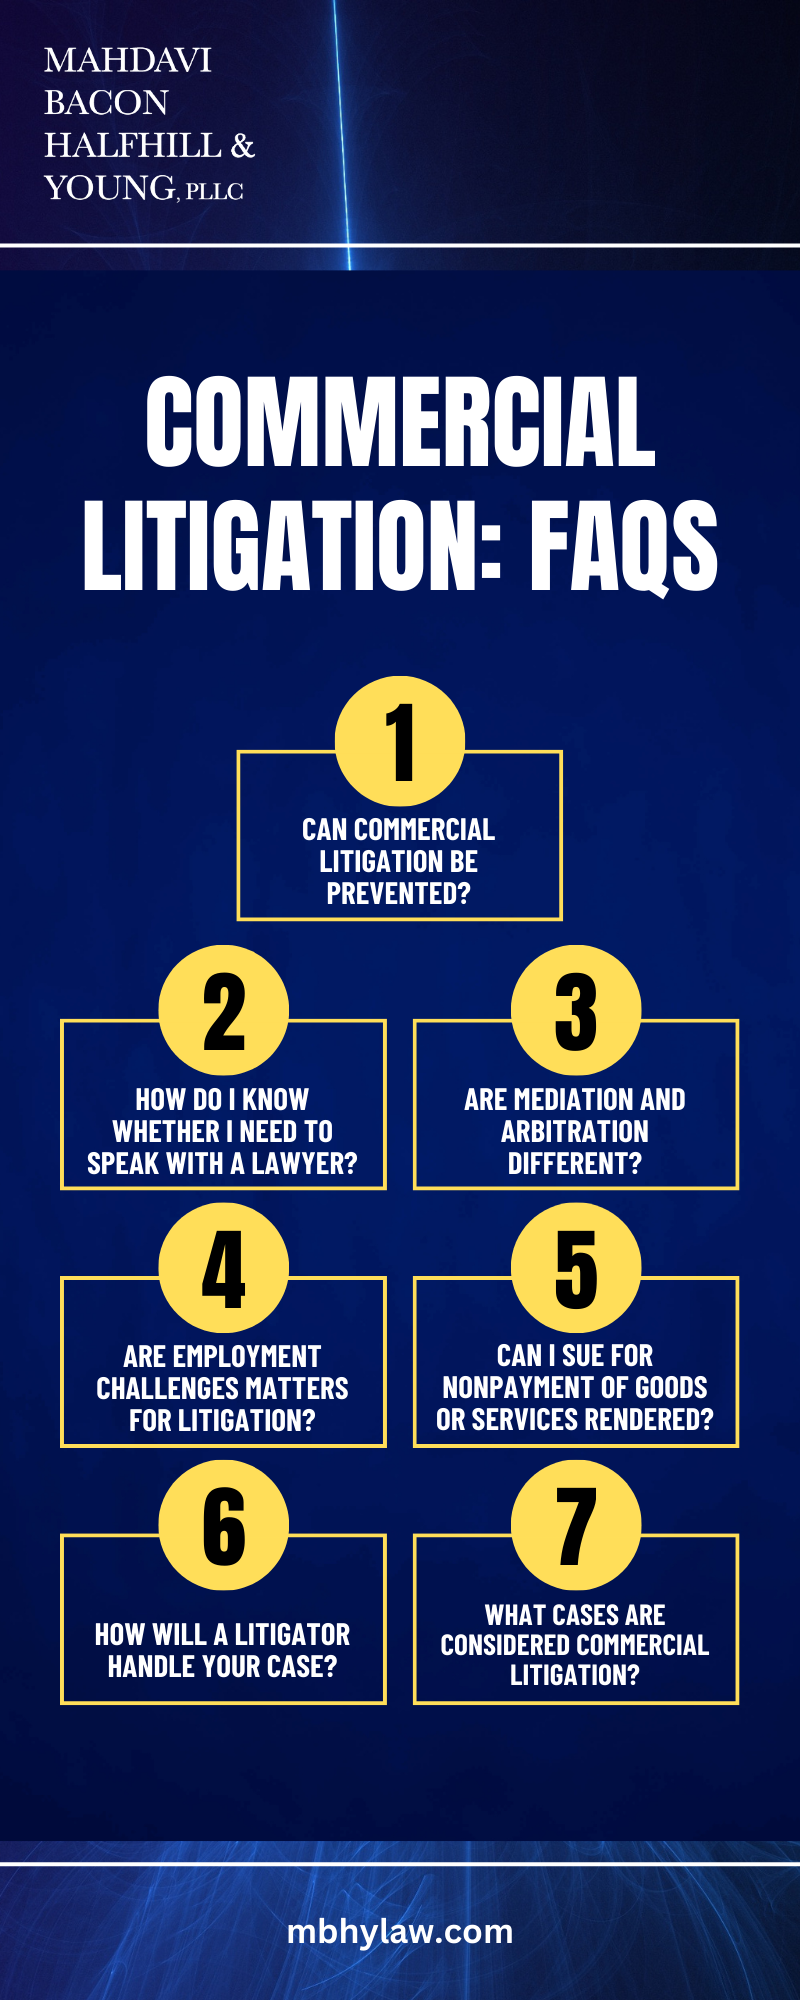 Commercial Litigation: FAQS Infographic